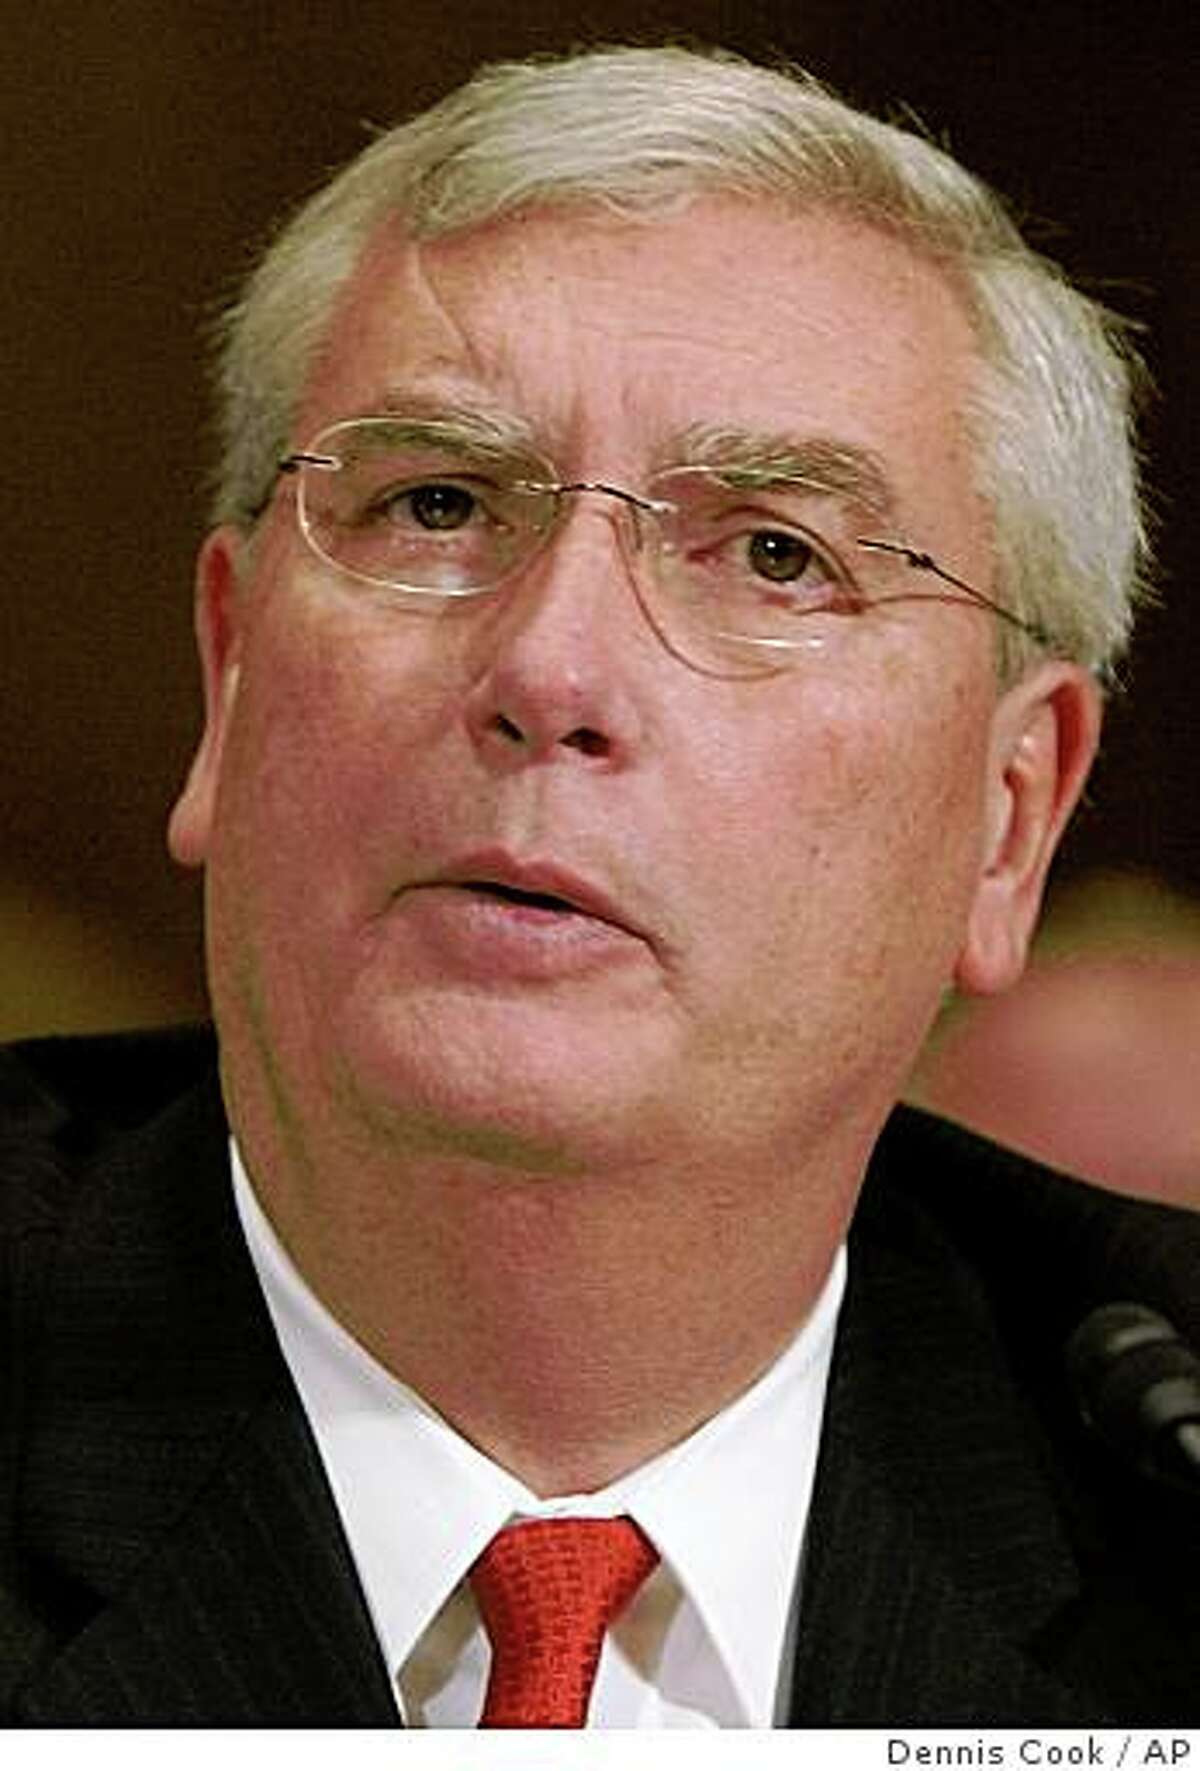 ** FILE ** In his Jan. 24, 2008 file photo, Environmental Protection Agency Administrator Stephen Johnson, is seen in Washington. A House committee on Friday, June 20, 2008, backed off a threatened contempt of Congress vote against the EPA chief after President Bush made a last-minute assertion of executive privilege over information the committee wants. (AP Photo/Dennis Cook, File)